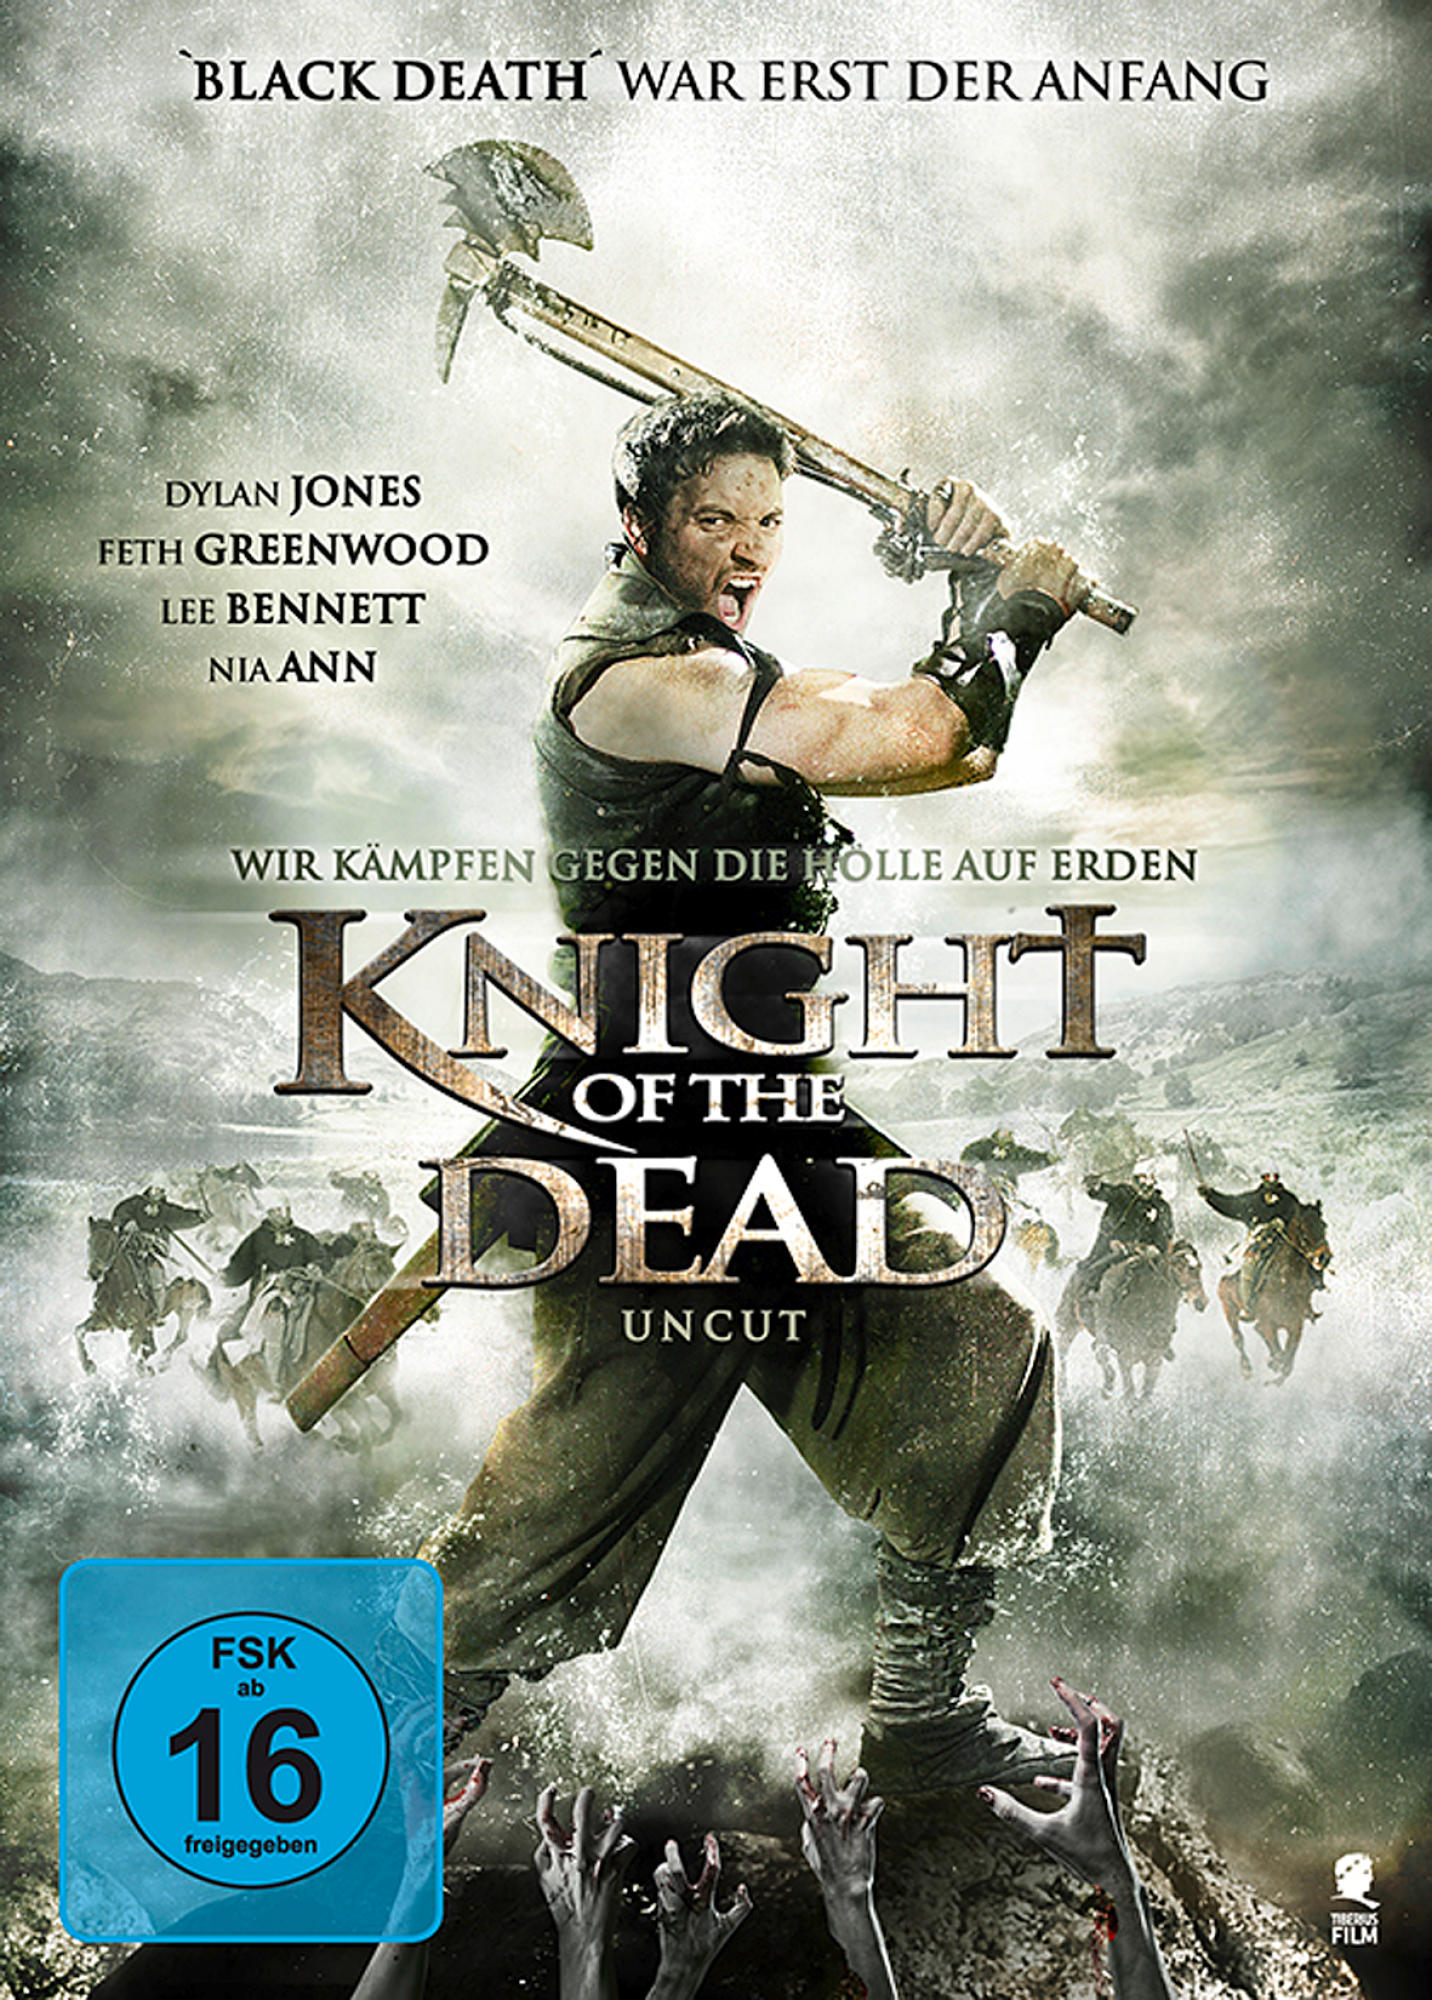 the Dead of Knight DVD